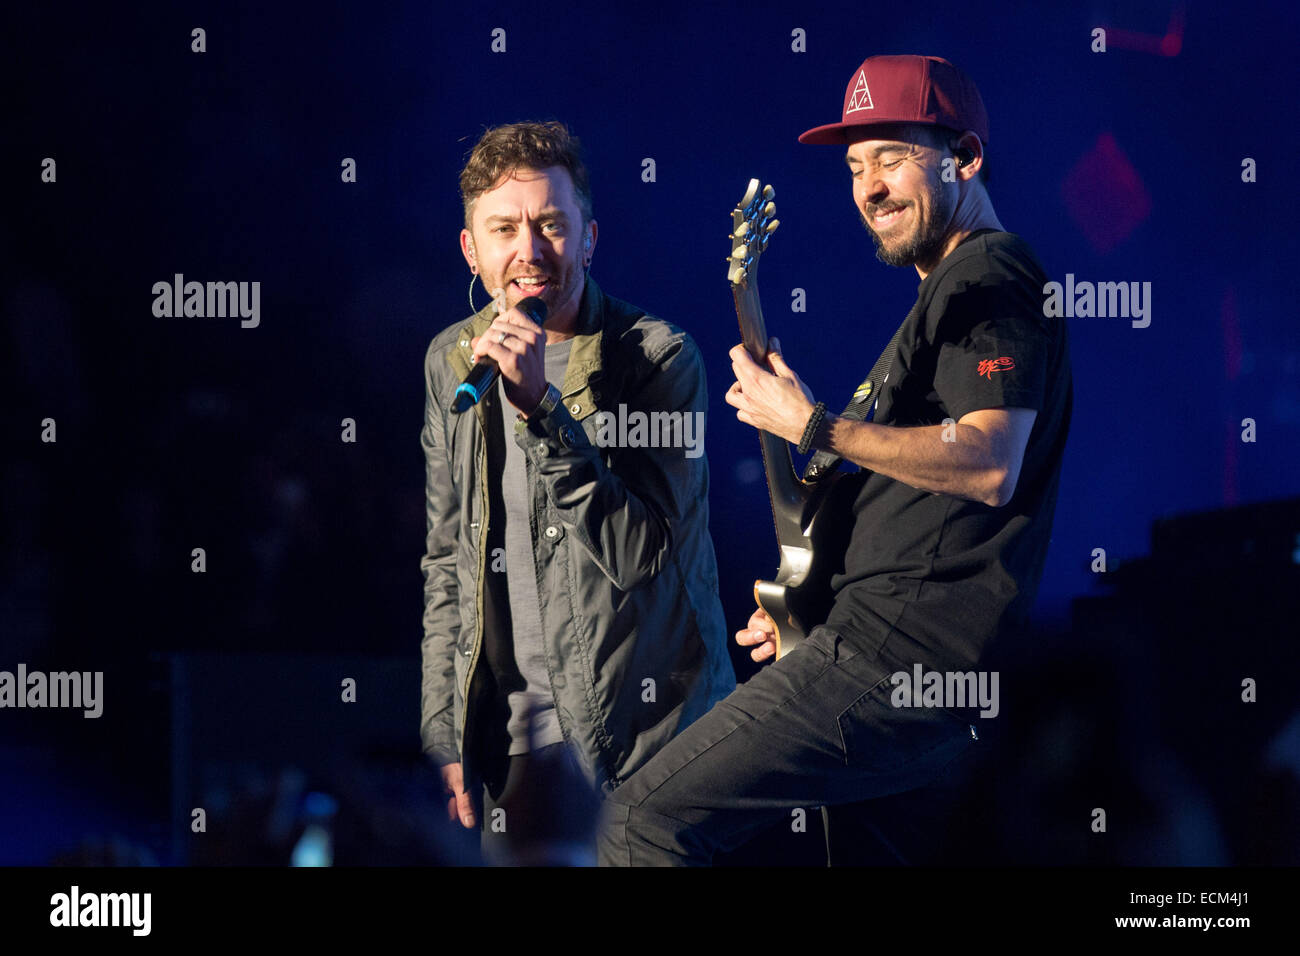 Inglewood, California, USA. 14th Dec, 2014. MIKE SHINODA (R) of Linkin Park and TIM MCILRATH (Rise Against) perform live in concert at the 25th annual KROQ Almost Acoustic Christmas at The Forum in Inglewood, California © Daniel DeSlover/ZUMA Wire/Alamy Live News Stock Photo